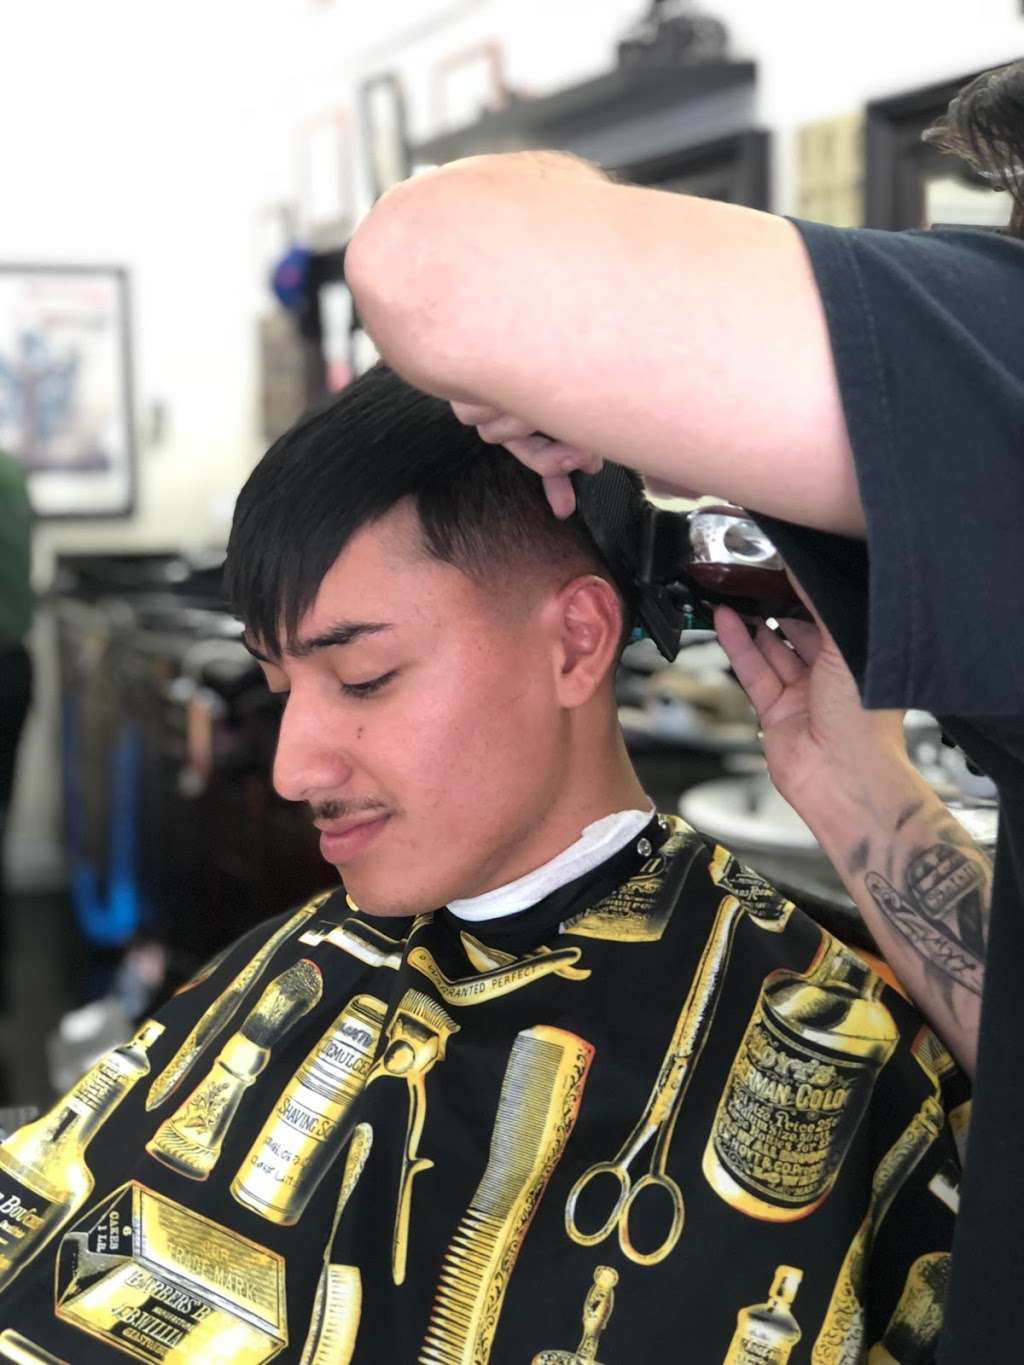 The Señor Barbers at Downtown | 113 S El Camino Real, San Clemente, CA 92672 | Phone: (949) 369-7707